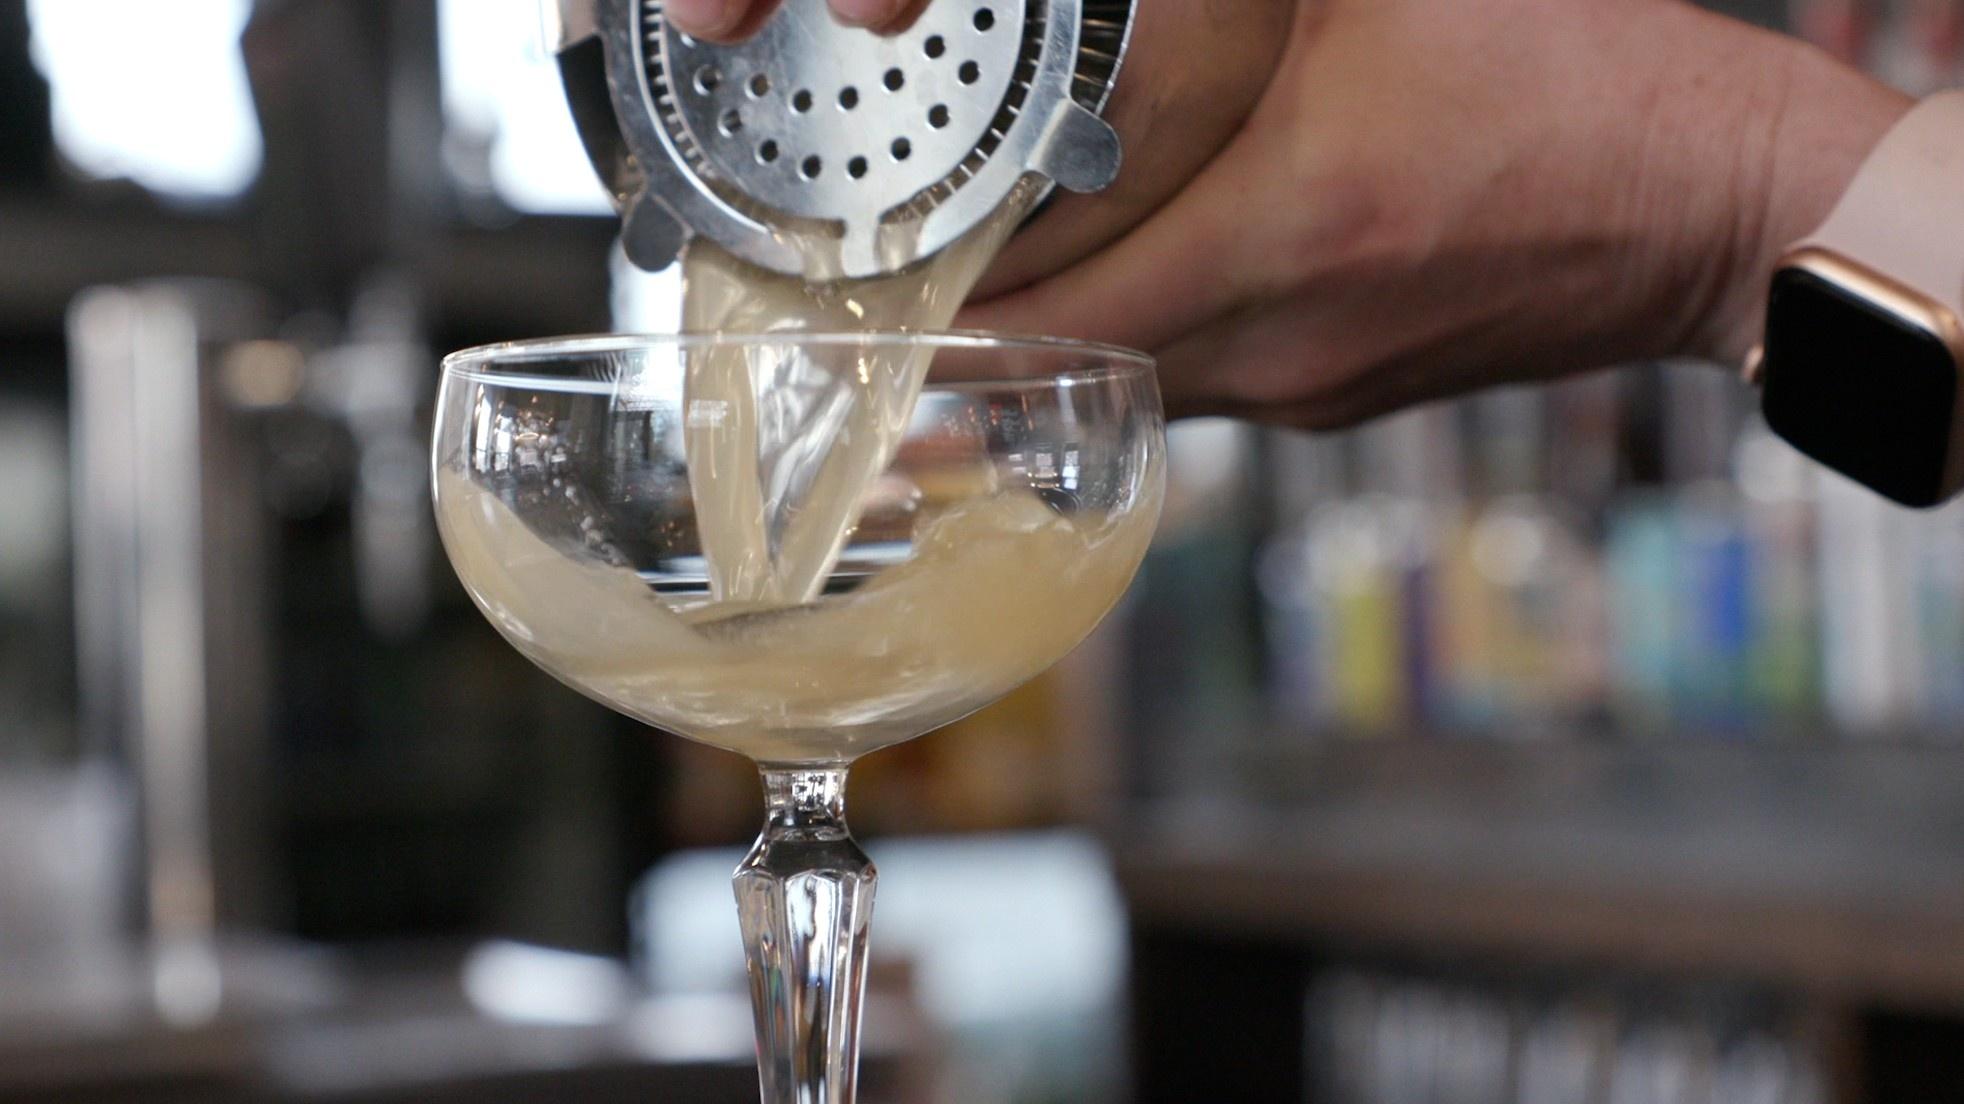 Denver's first 'sober bar' shows how Dry January can become a lifestyle